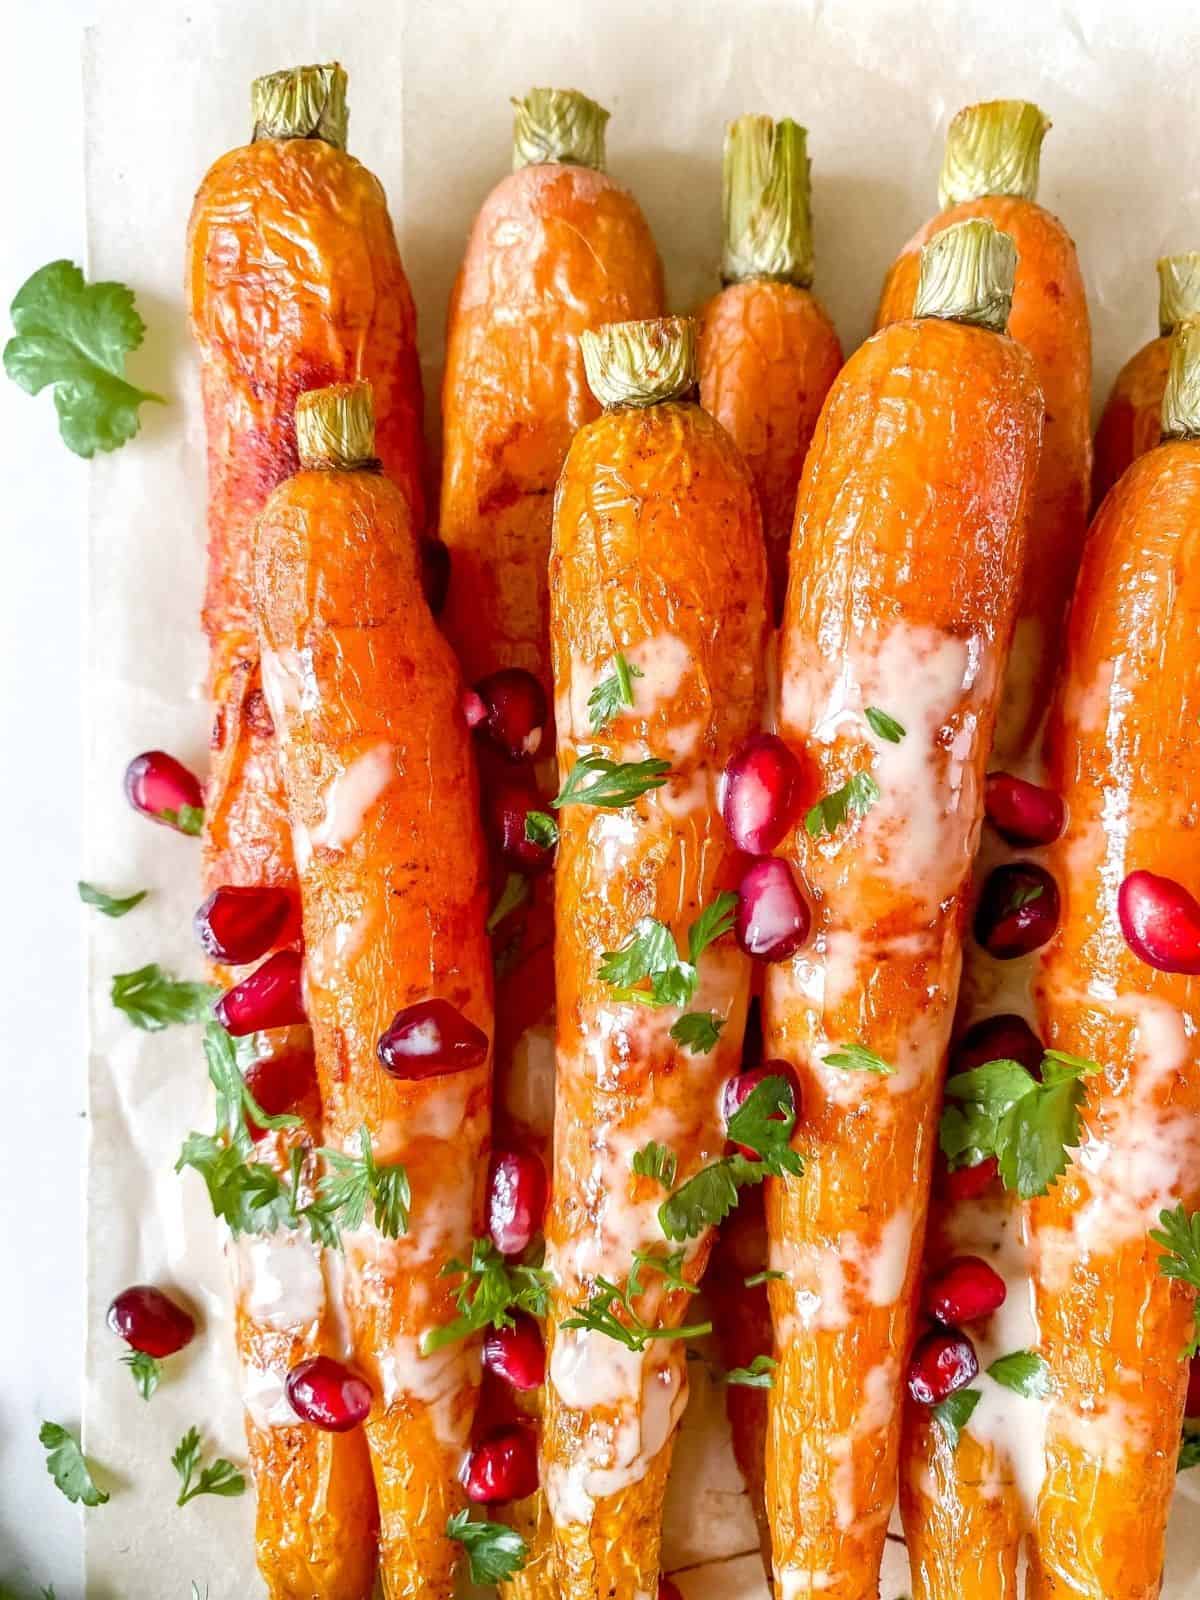 roasted carrots with tahini sauce, pomegranate and herbs.